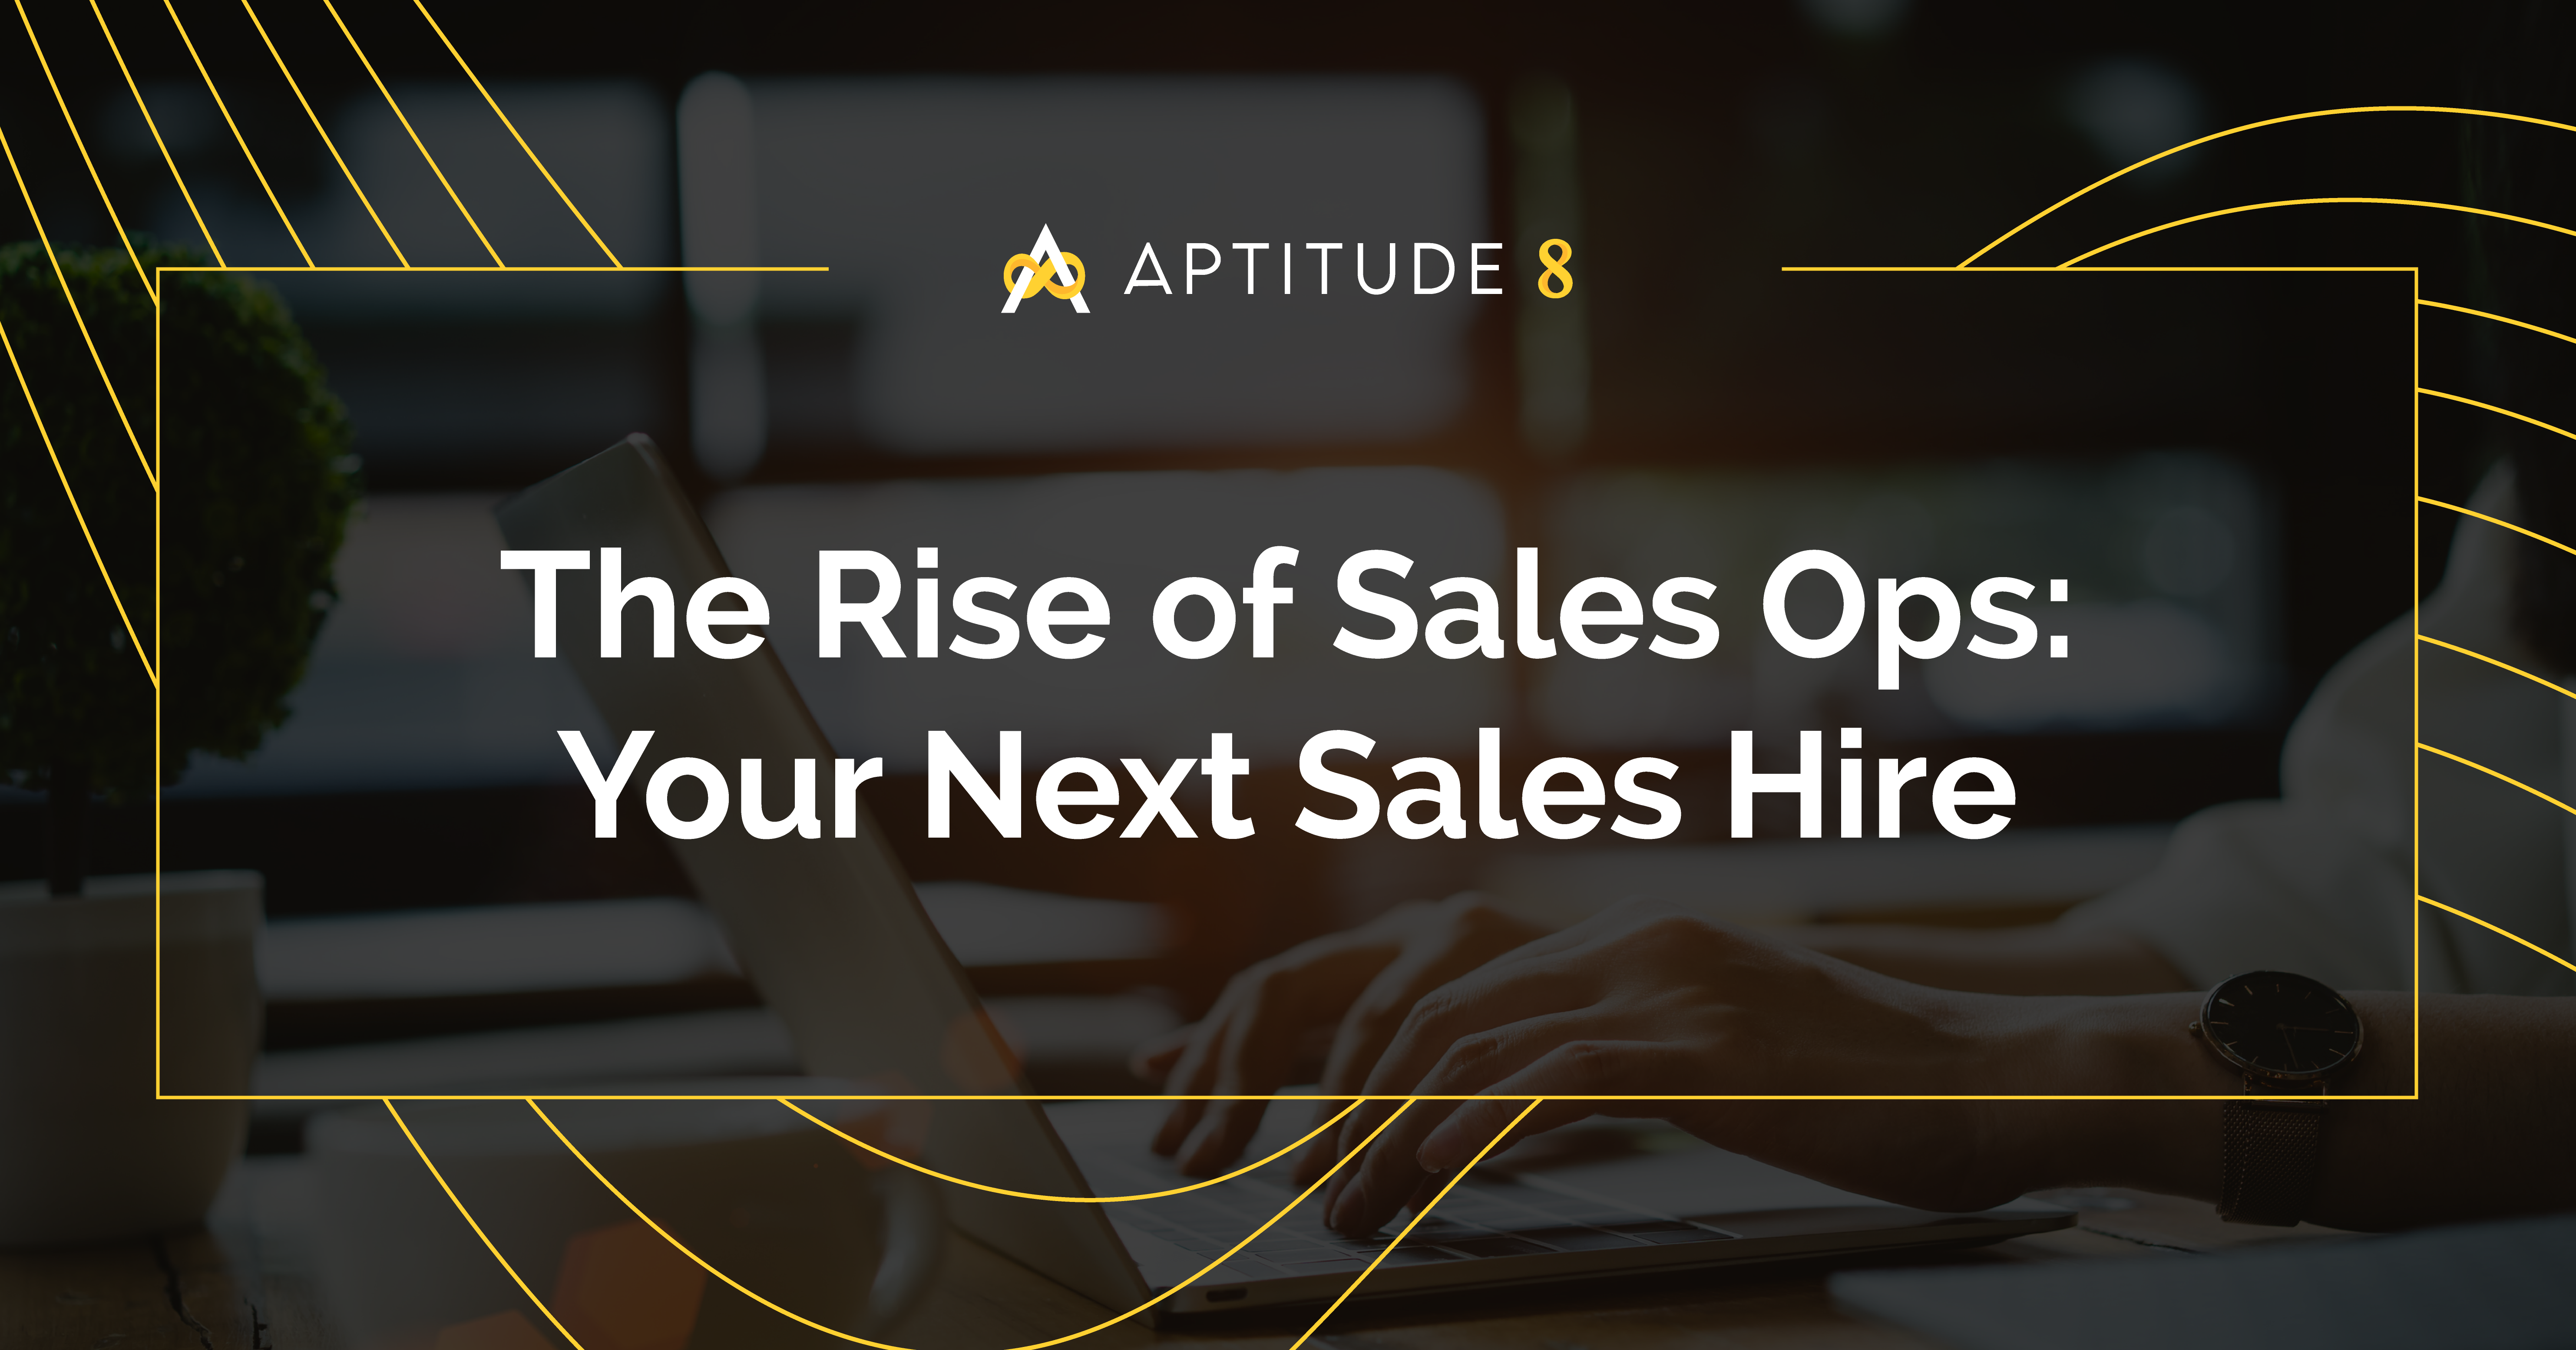 The Rise of Sales Ops: Your Next Sales Hire